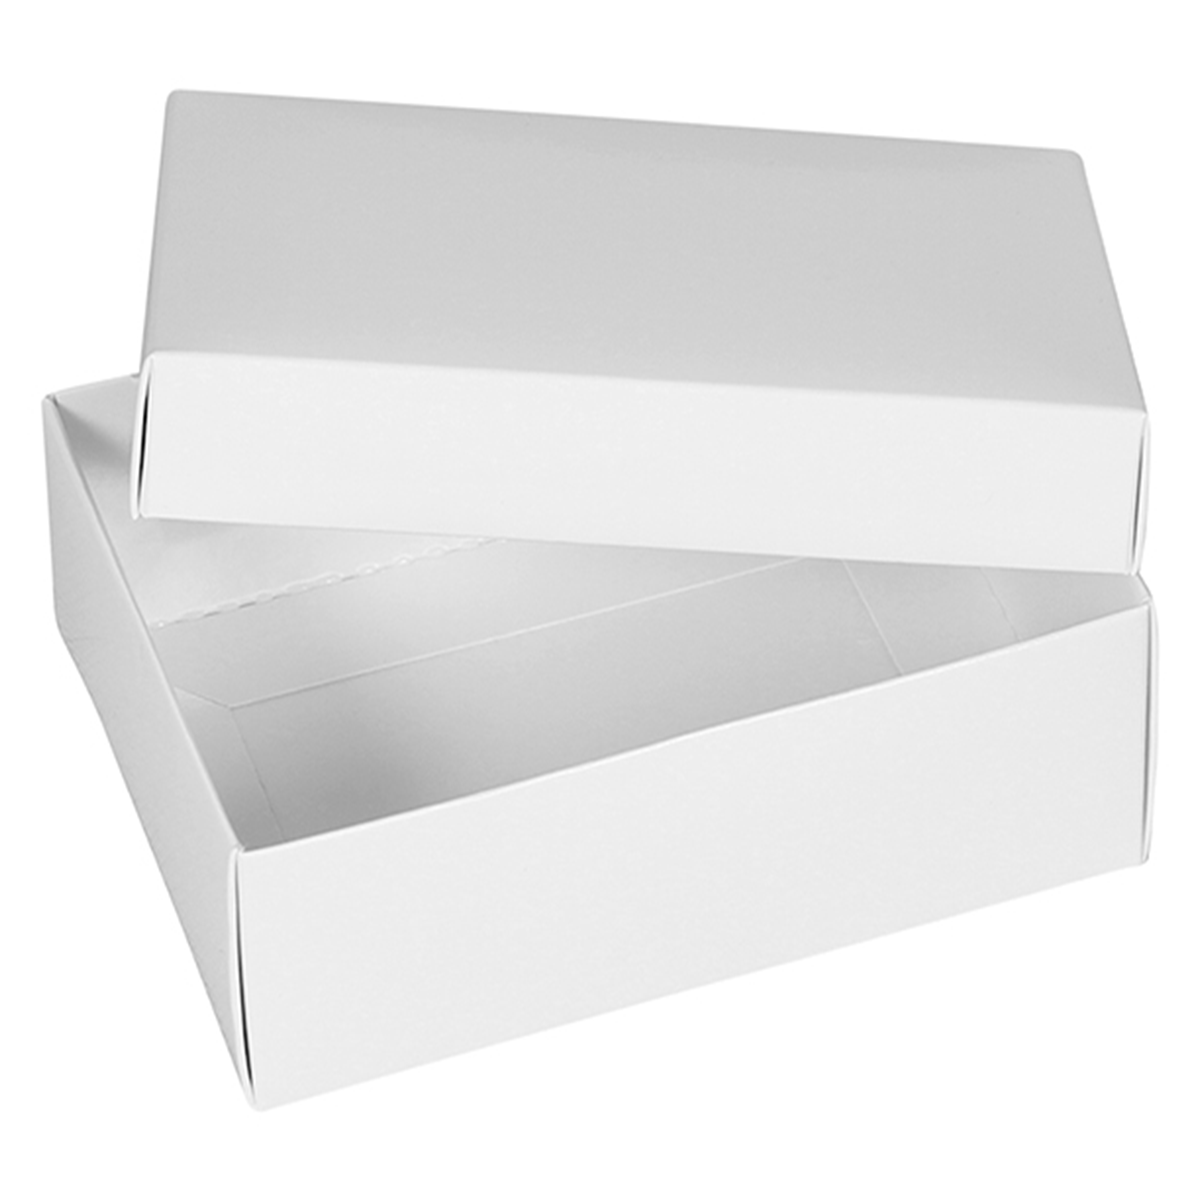 Large 10Pc Pack Premium White Kraft Two Piece Gift Boxes 26 x 20 x 8 Cms - Willow